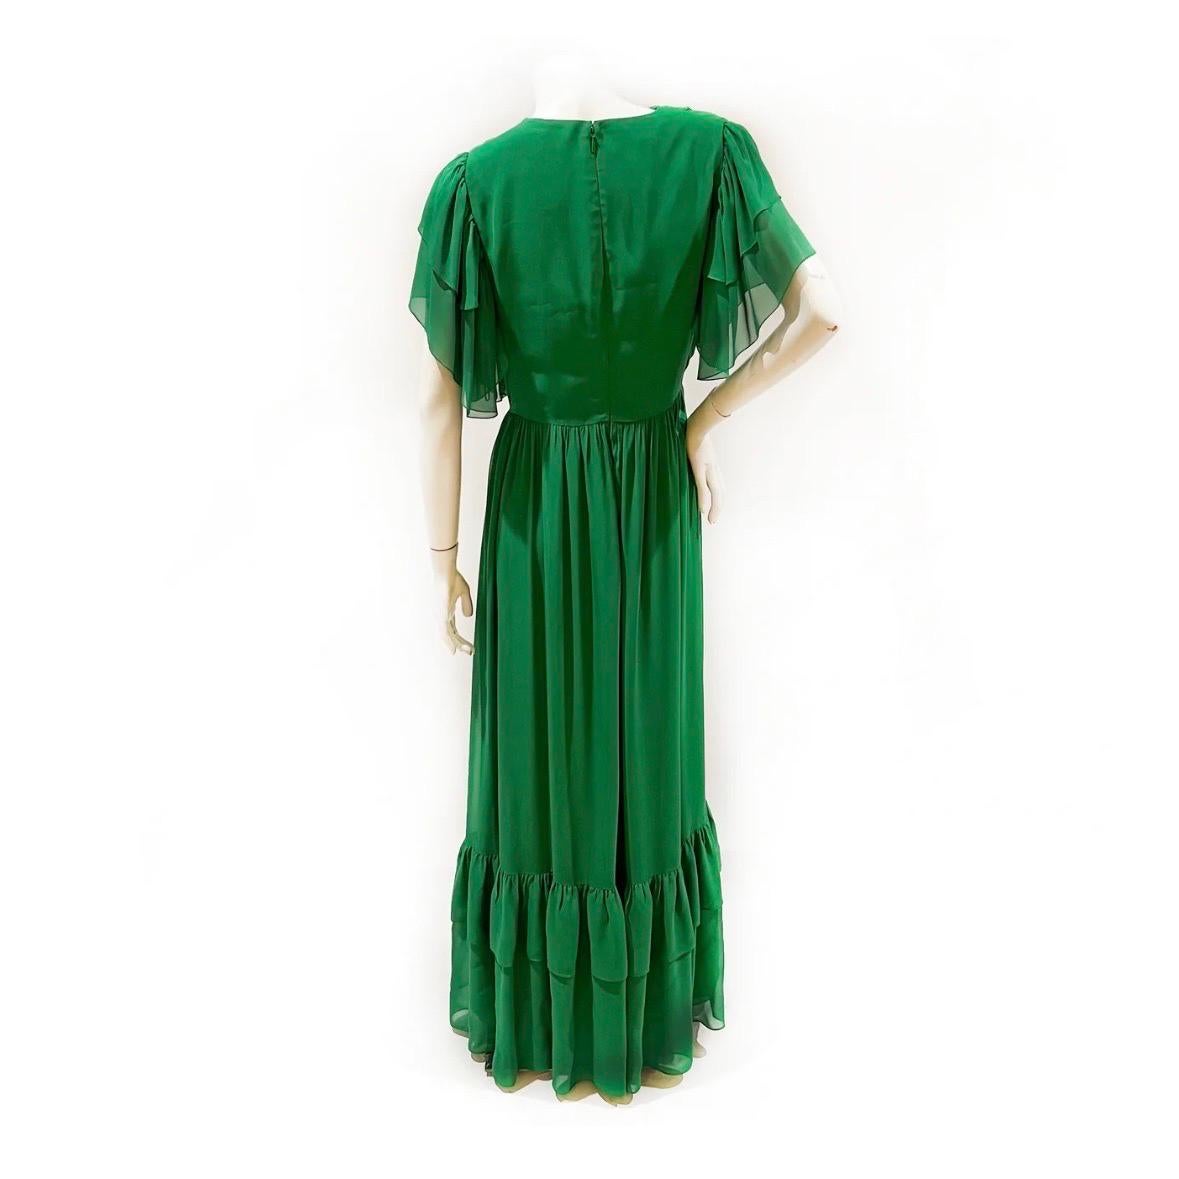 Chiffon ruffle maxi dress by Gucci 
Circa 2019
Made in Italy 
Kelly green
Ruched detail on shoulders 
Ruffle layered semi-sheer sleeves
Wrapped bust 
Double layer of ruffles at bottom hem 
Back zipper and hook closure 
100% viscose, (lining 76%